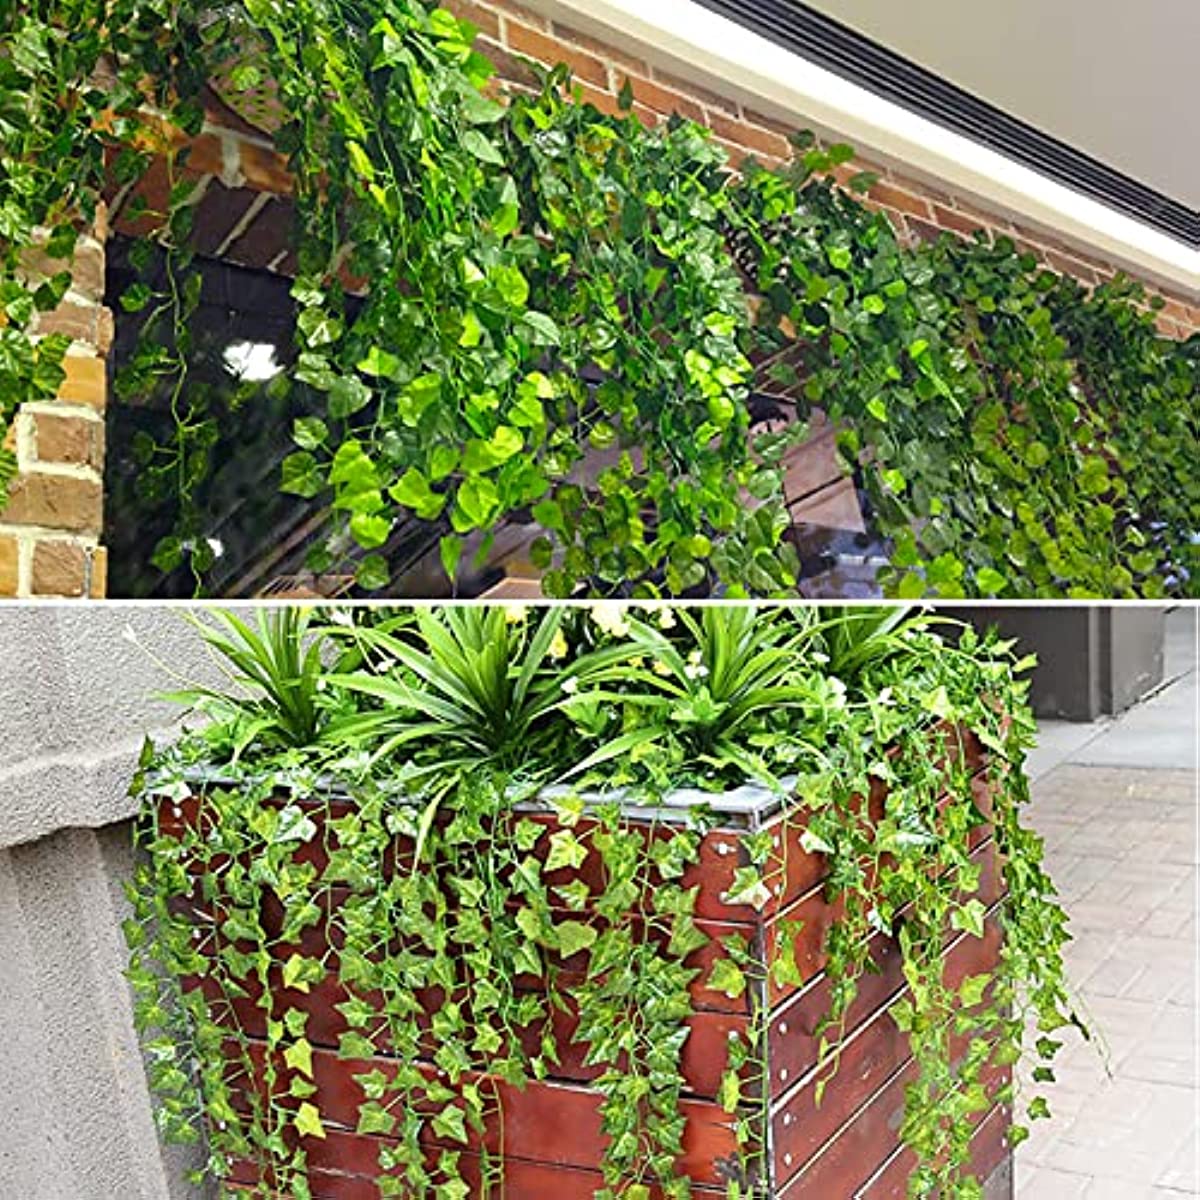 Artificial Long Hanging Vine Plant Wall Fake Ivy Leaf Green